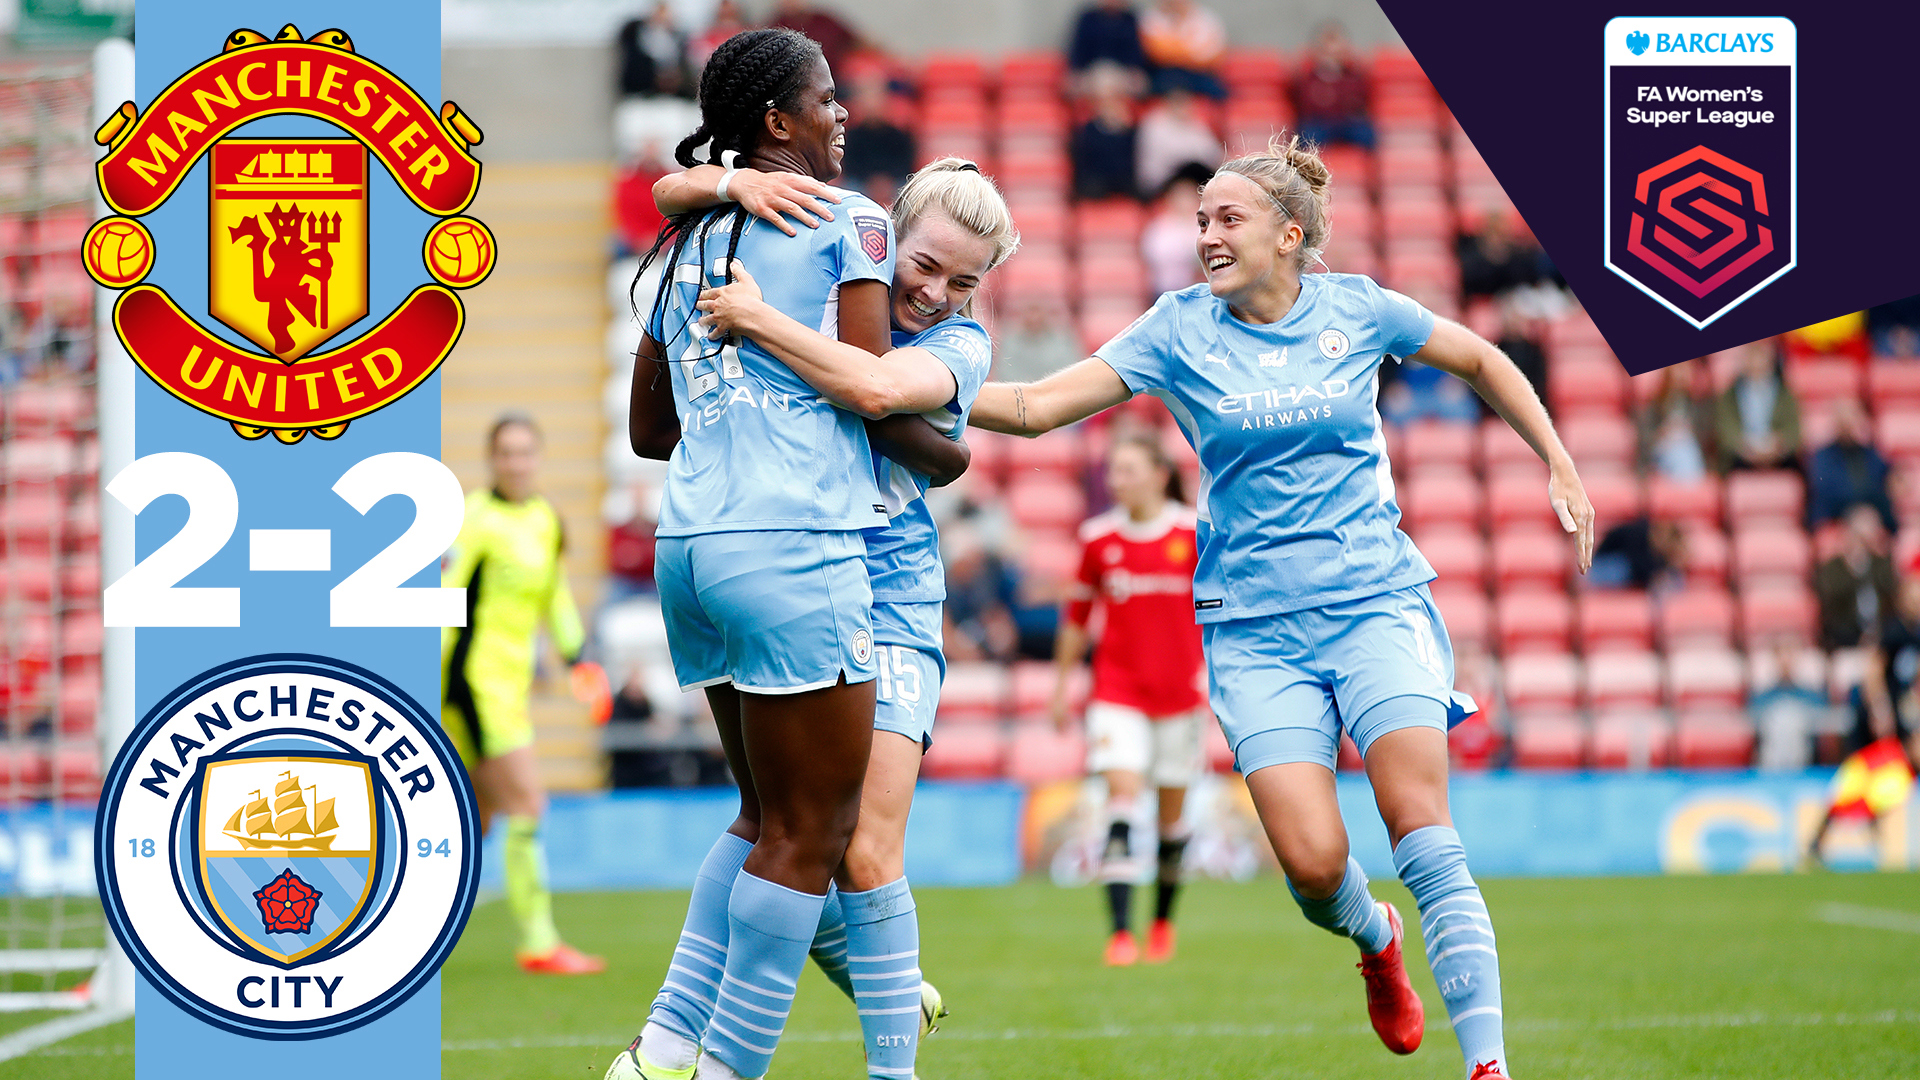 FA WSL highlights Manchester United 2-2 City